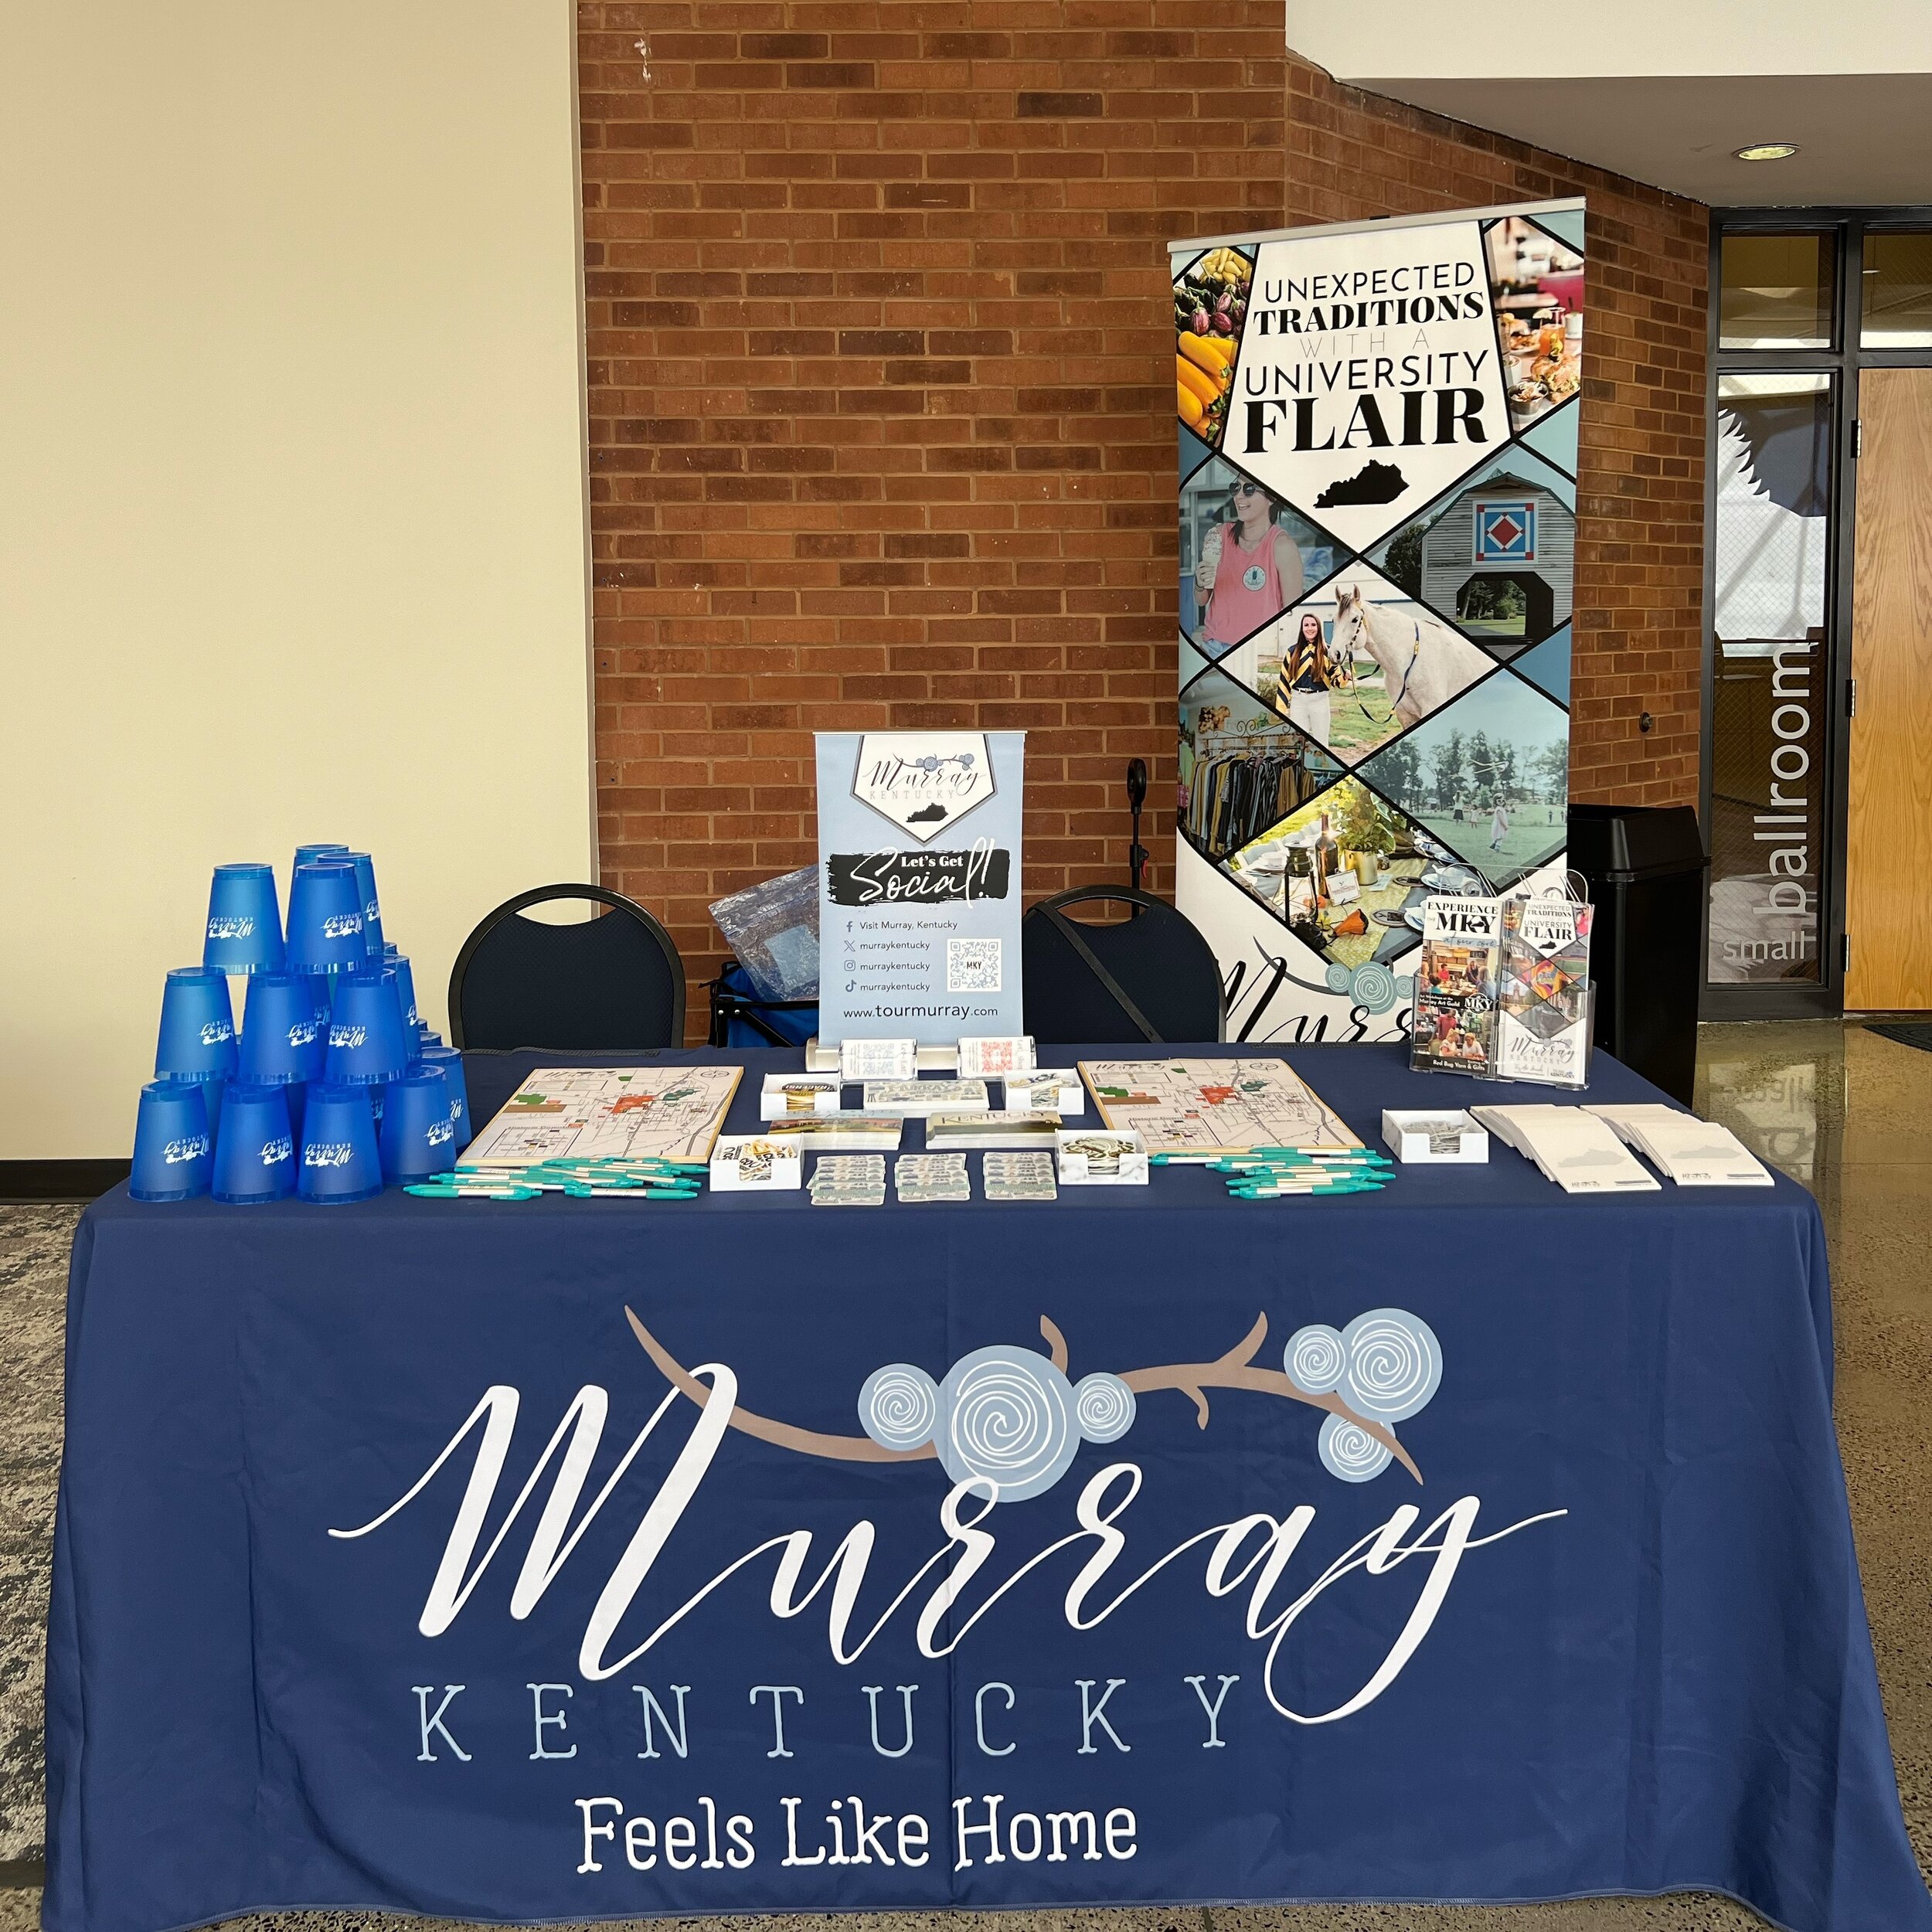 We&rsquo;re all set up and ready to greet potential students at Racer Day on campus! Stop by our booth for all your Murray swag and fun information🤩💙

#MurrayKY #MurrayKentucky #GoRacers